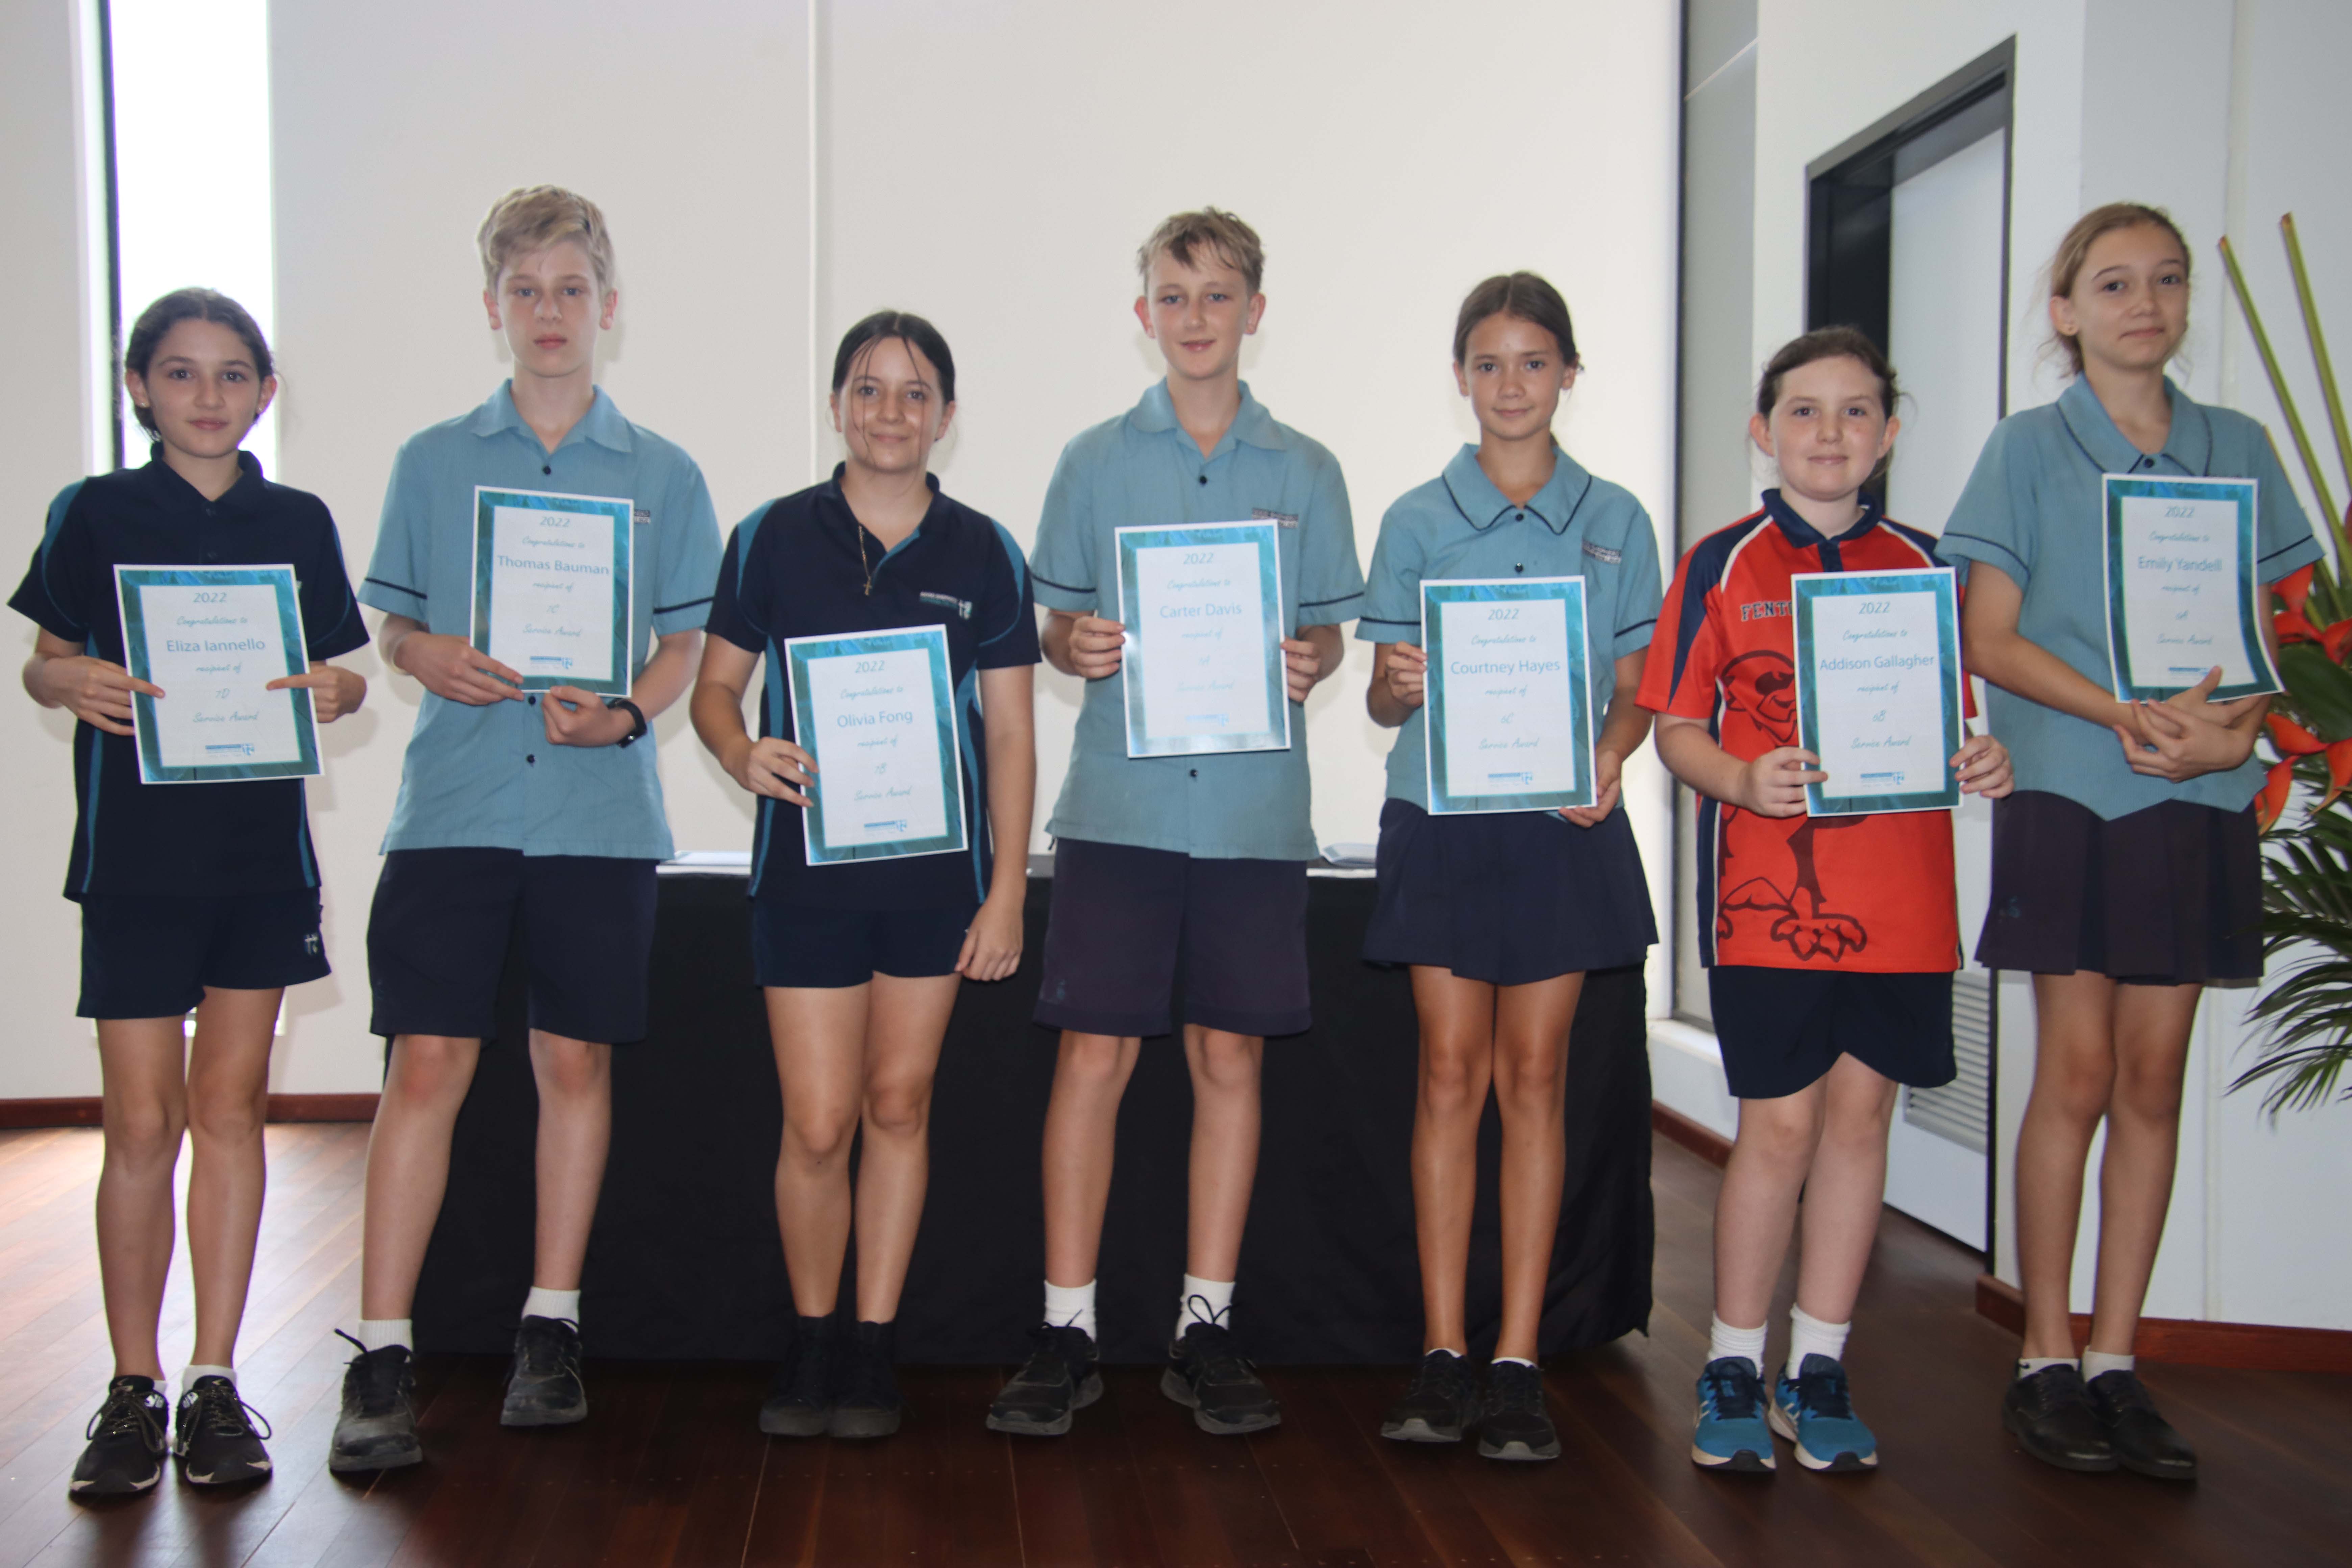 Awards Assembly Years 6 & 7